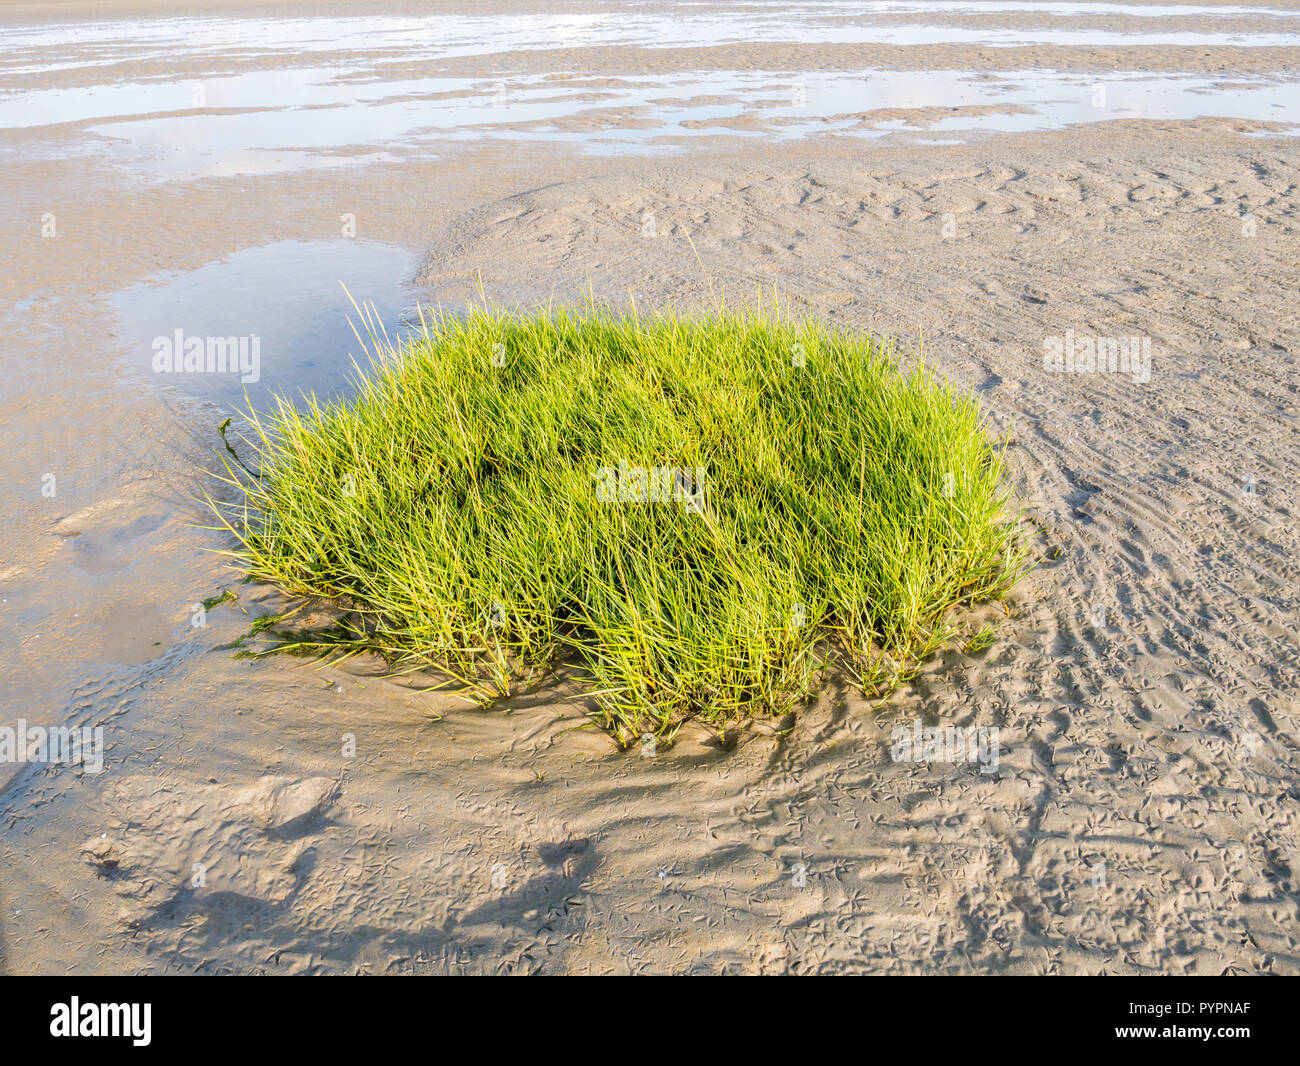 Sandflat at low tide with sod of common cordgrass, Spartina anglica, Wadden Sea, Netherlands Stock Photo